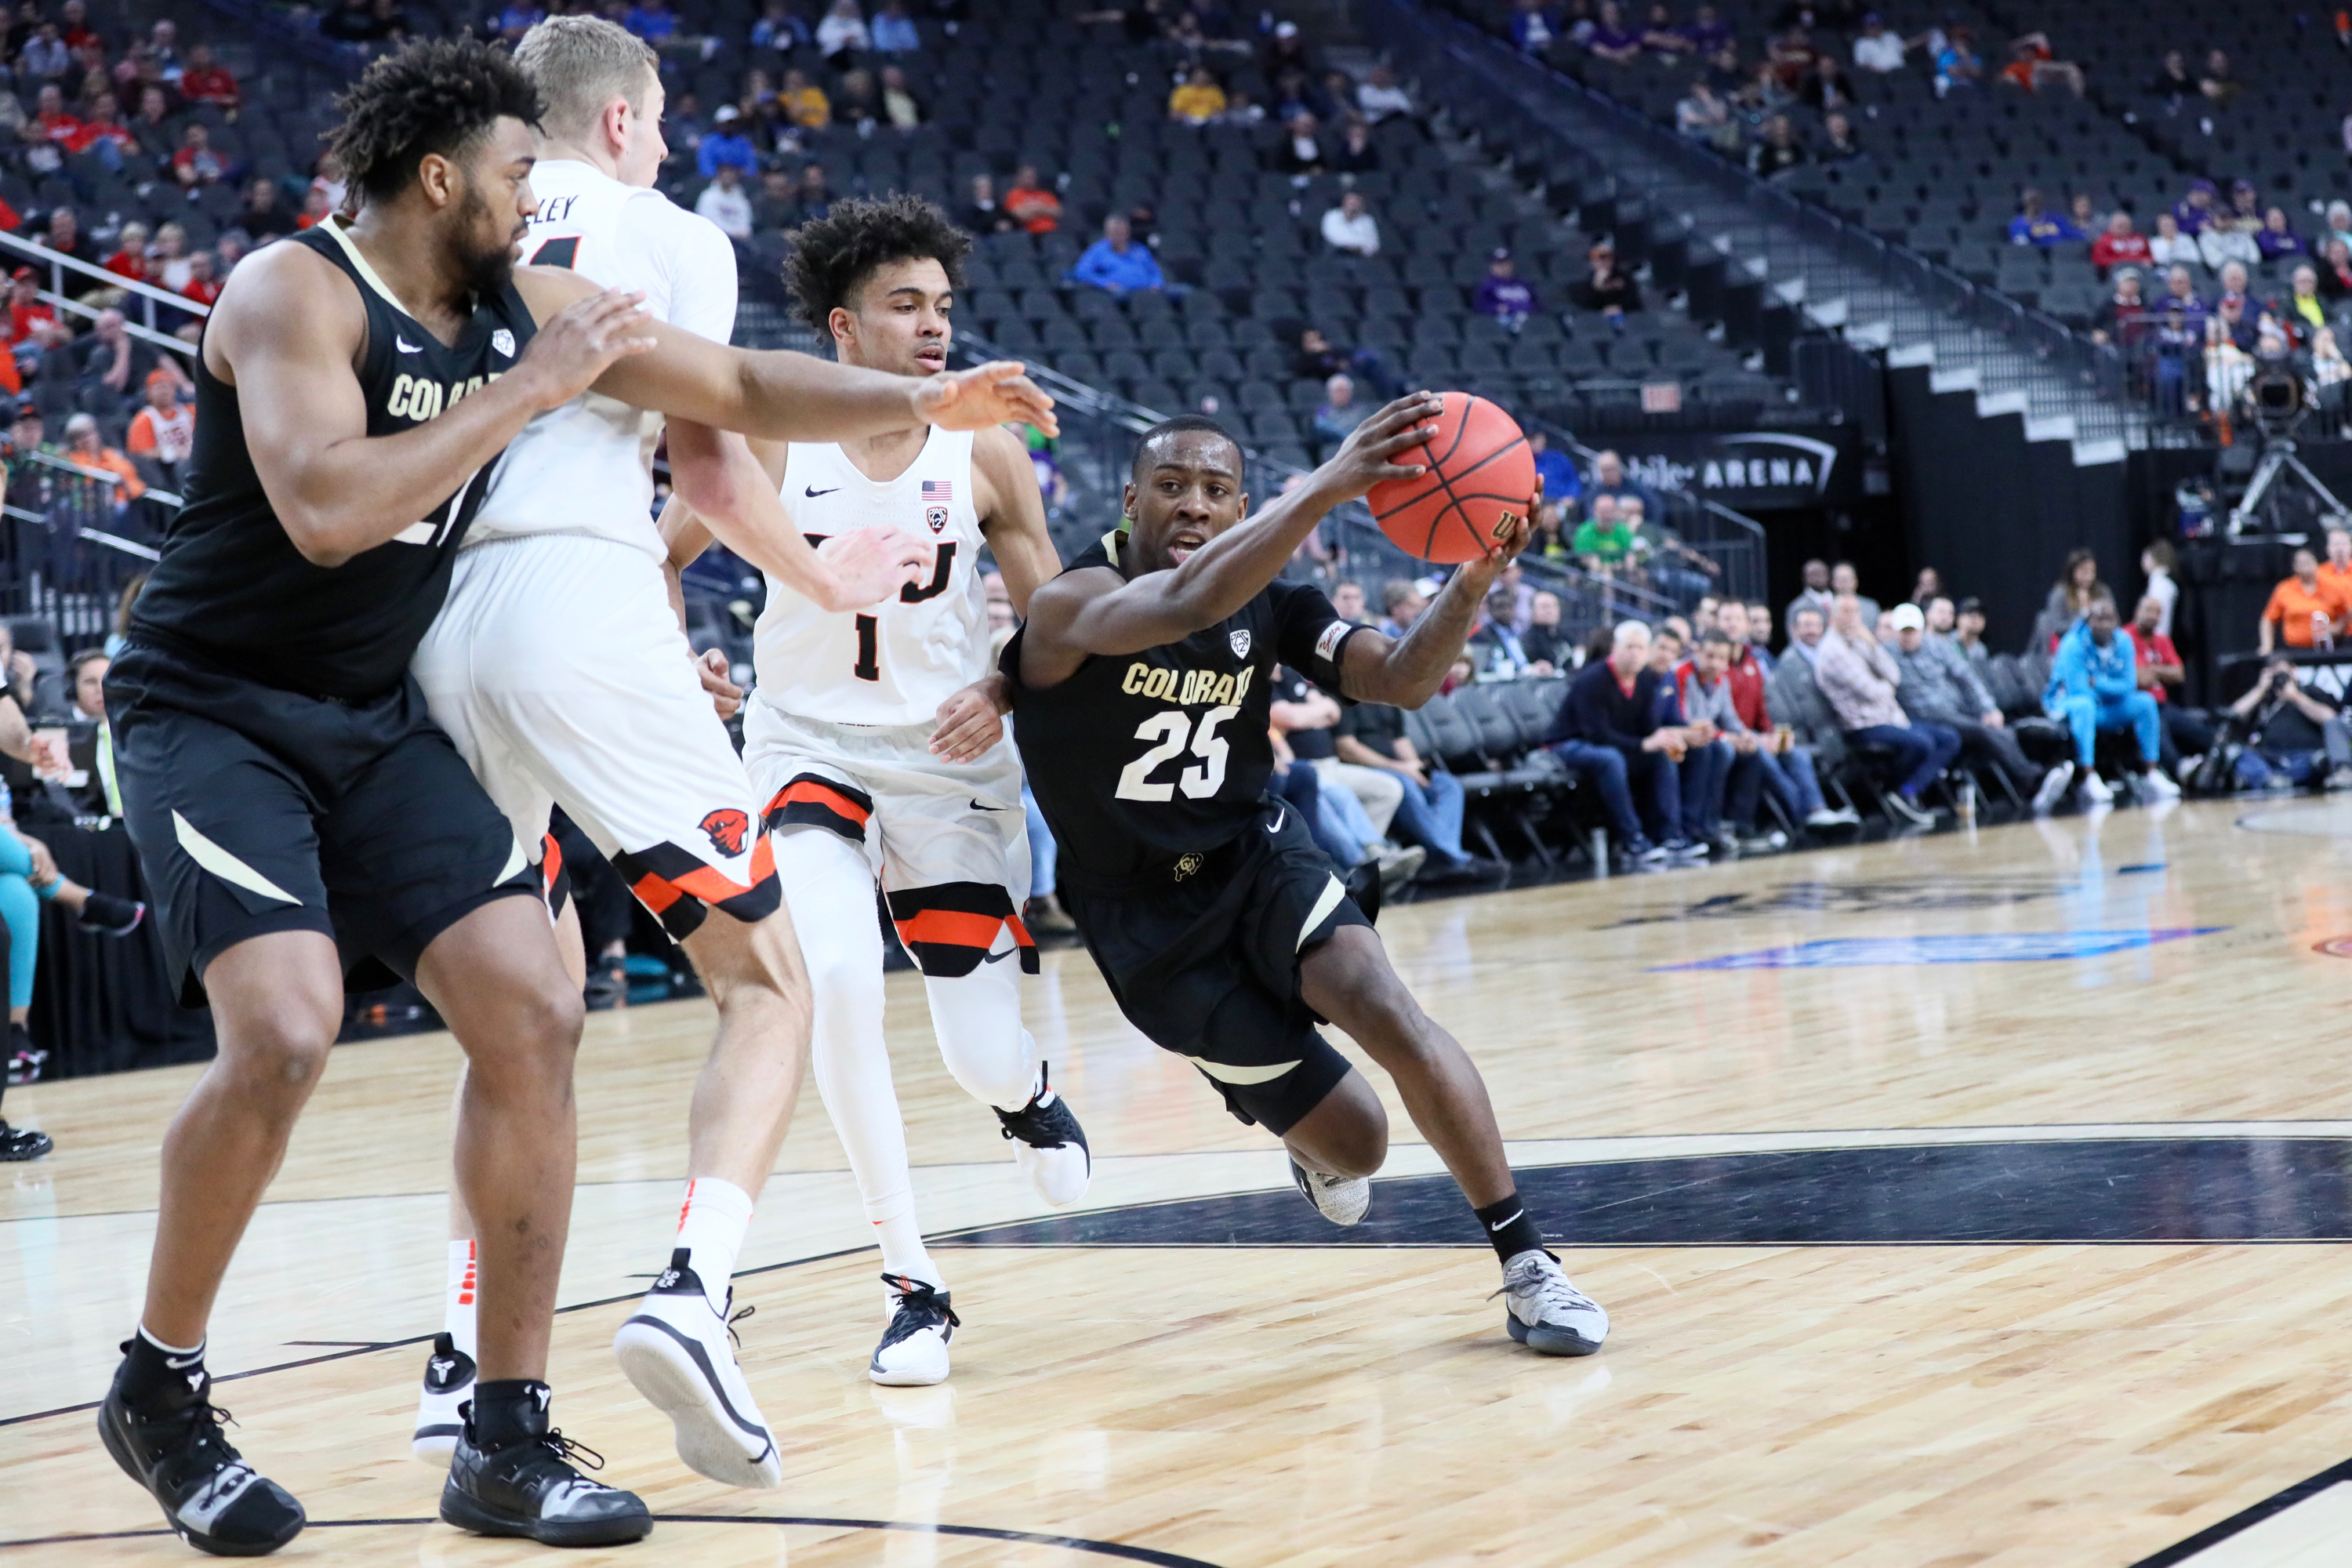 Buffs survive OSU’s rally, advance to Pac-12 Tourney semifinals